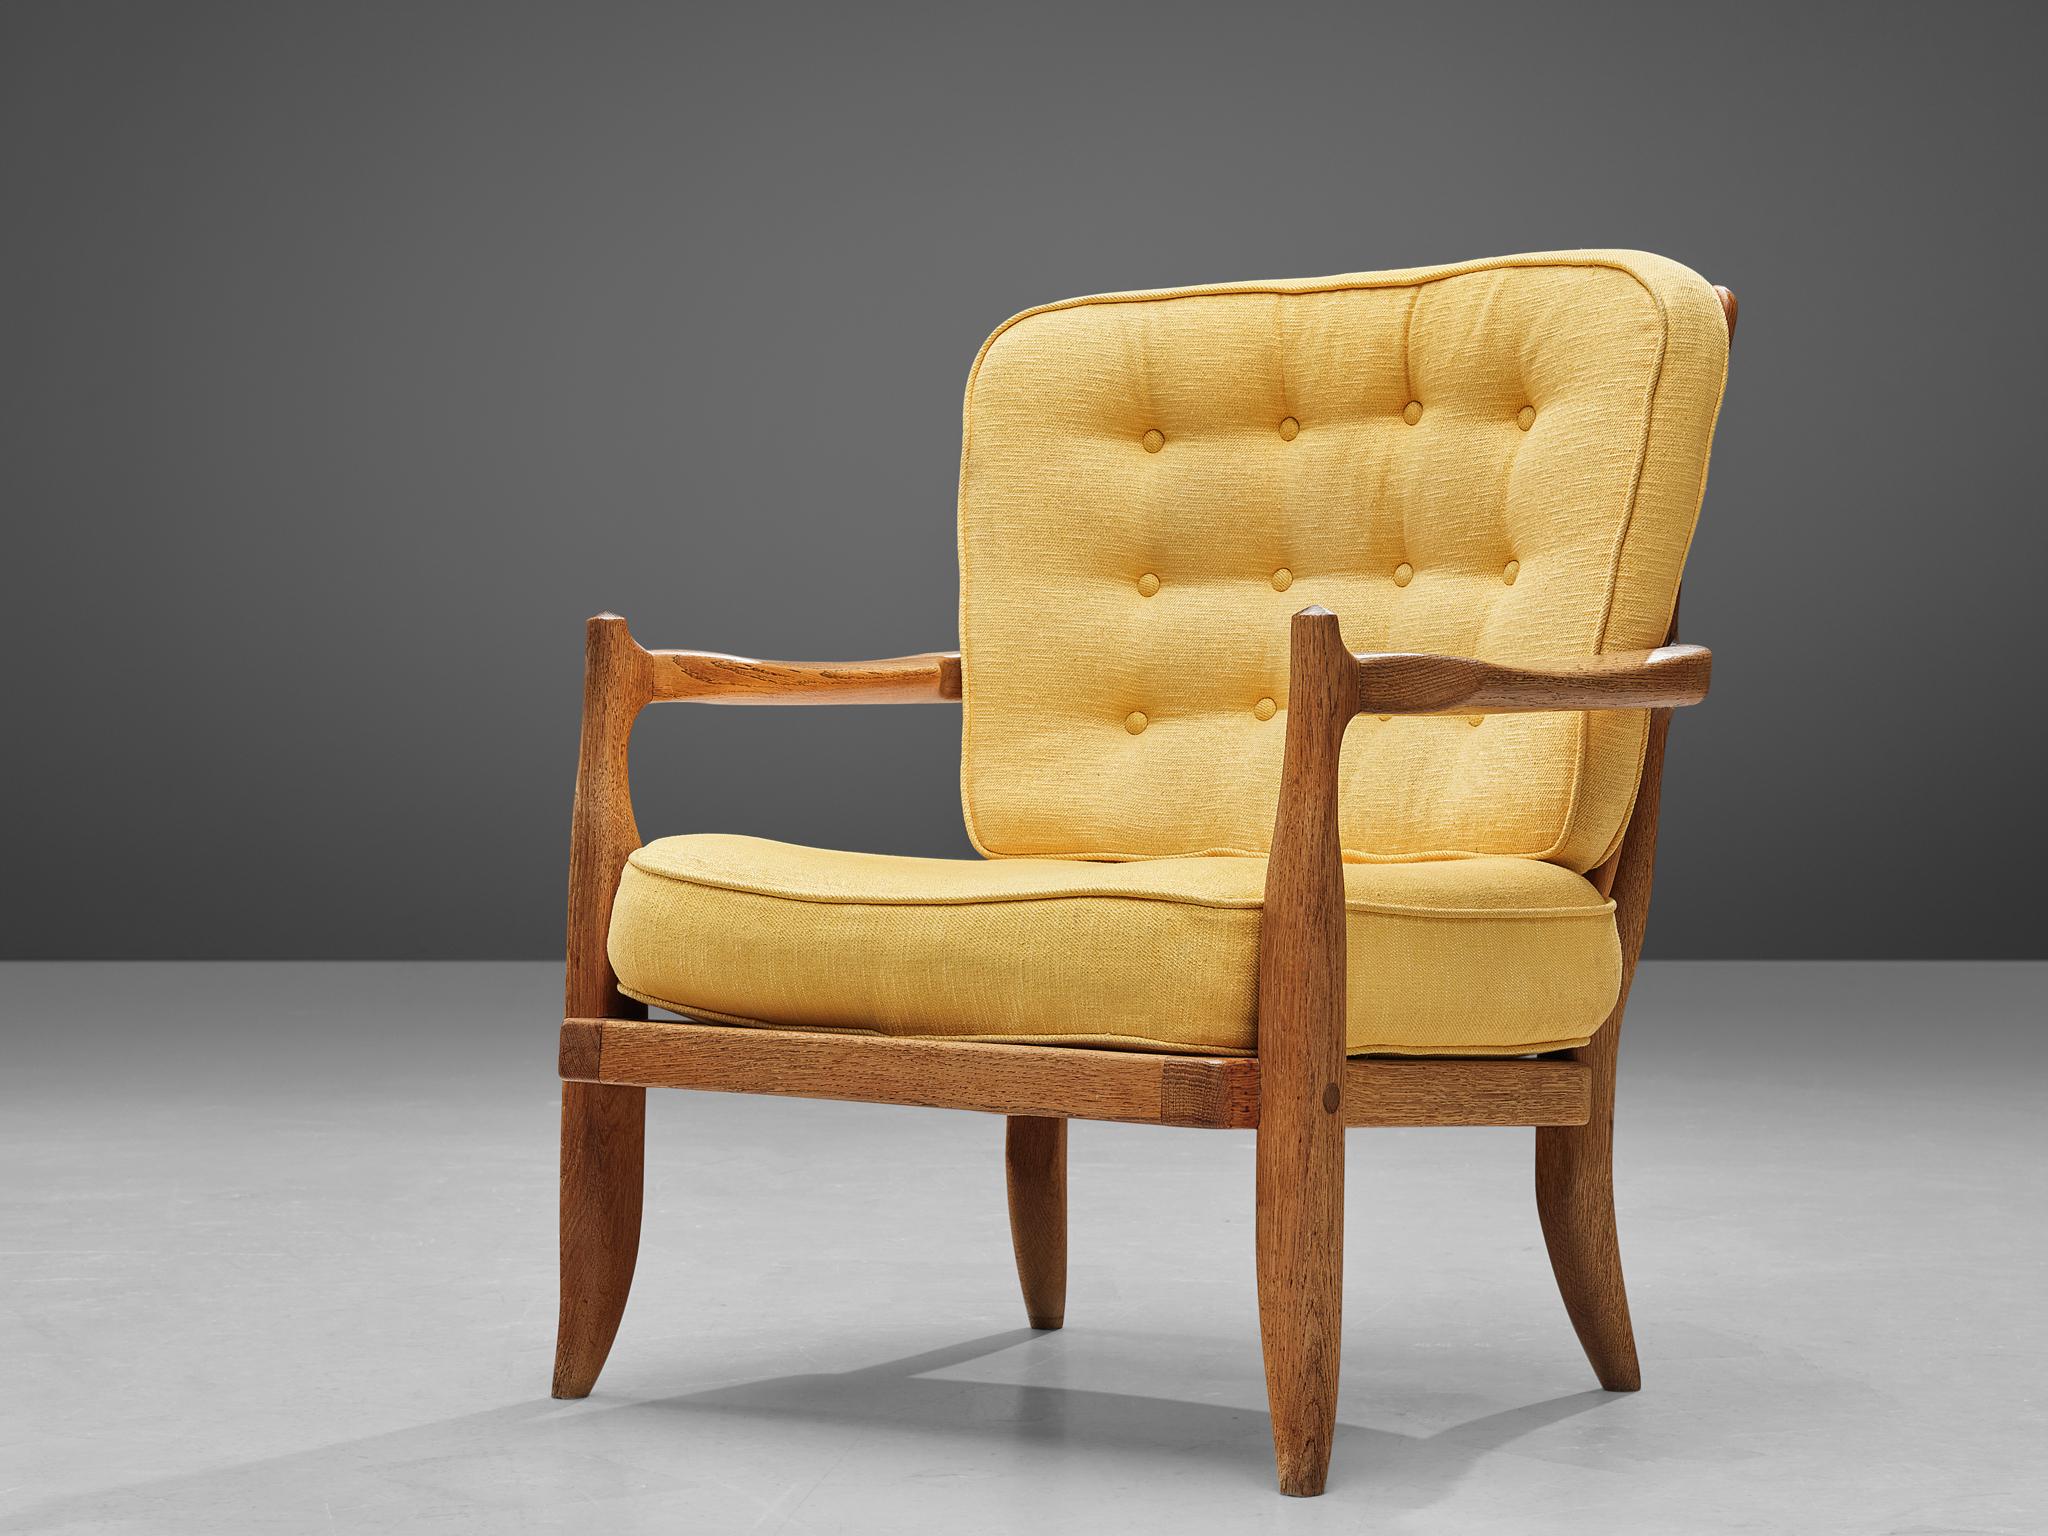 Guillerme et Chambron, lounge chair, oak and yellow upholstery, France, 1960s. 

Well sculpted Guillerme and Chambron lounge chair, in solid oak with the characteristic decorative details at the back and capricious forms of the legs. The